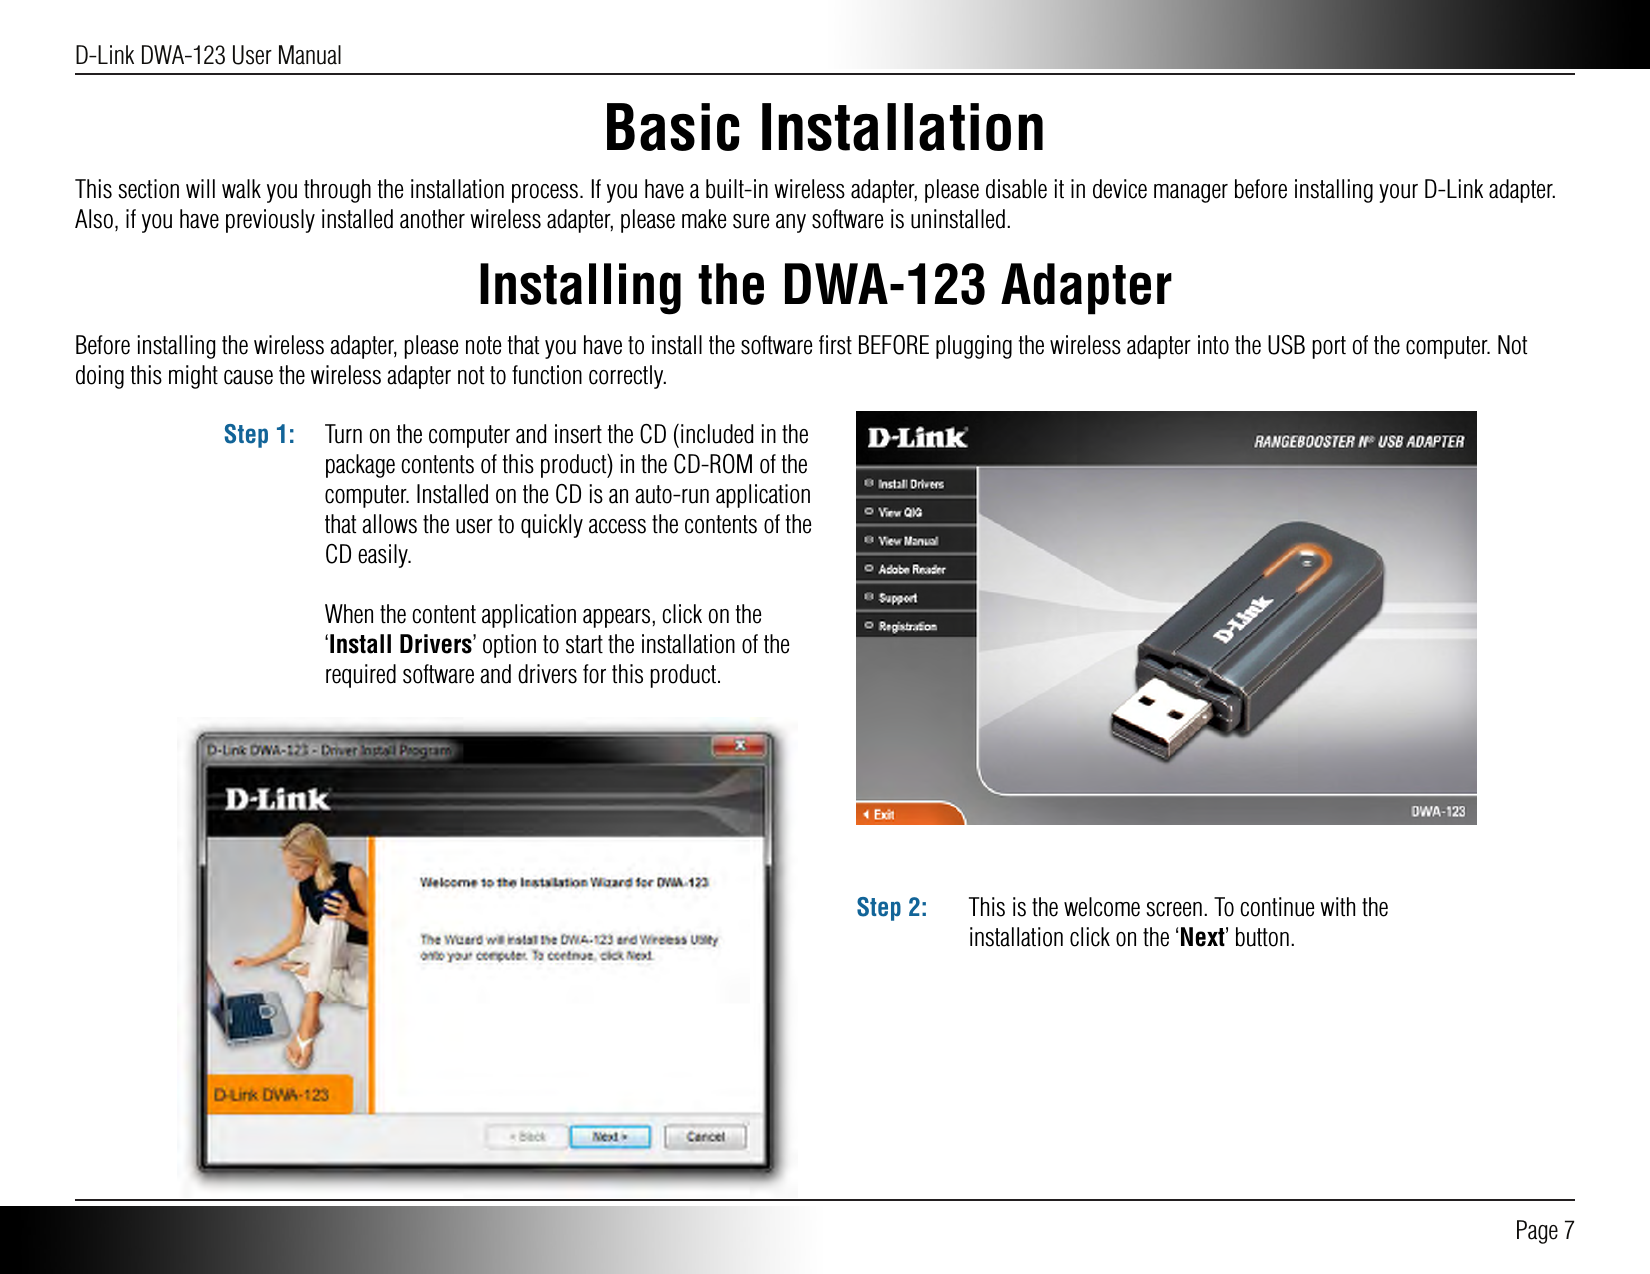 D-Link DWA-123 User Manual Page 7Basic InstallationInstalling the DWA-123 AdapterThis section will walk you through the installation process. If you have a built-in wireless adapter, please disable it in device manager before installing your D-Link adapter. Also, if you have previously installed another wireless adapter, please make sure any software is uninstalled.Before installing the wireless adapter, please note that you have to install the software ﬁrst BEFORE plugging the wireless adapter into the USB port of the computer. Not doing this might cause the wireless adapter not to function correctly. Turn on the computer and insert the CD (included in the package contents of this product) in the CD-ROM of the computer. Installed on the CD is an auto-run application that allows the user to quickly access the contents of the CD easily.When the content application appears, click on the ‘Install Drivers’ option to start the installation of the required software and drivers for this product.Step 1:This is the welcome screen. To continue with the installation click on the ‘Next’ button.Step 2: